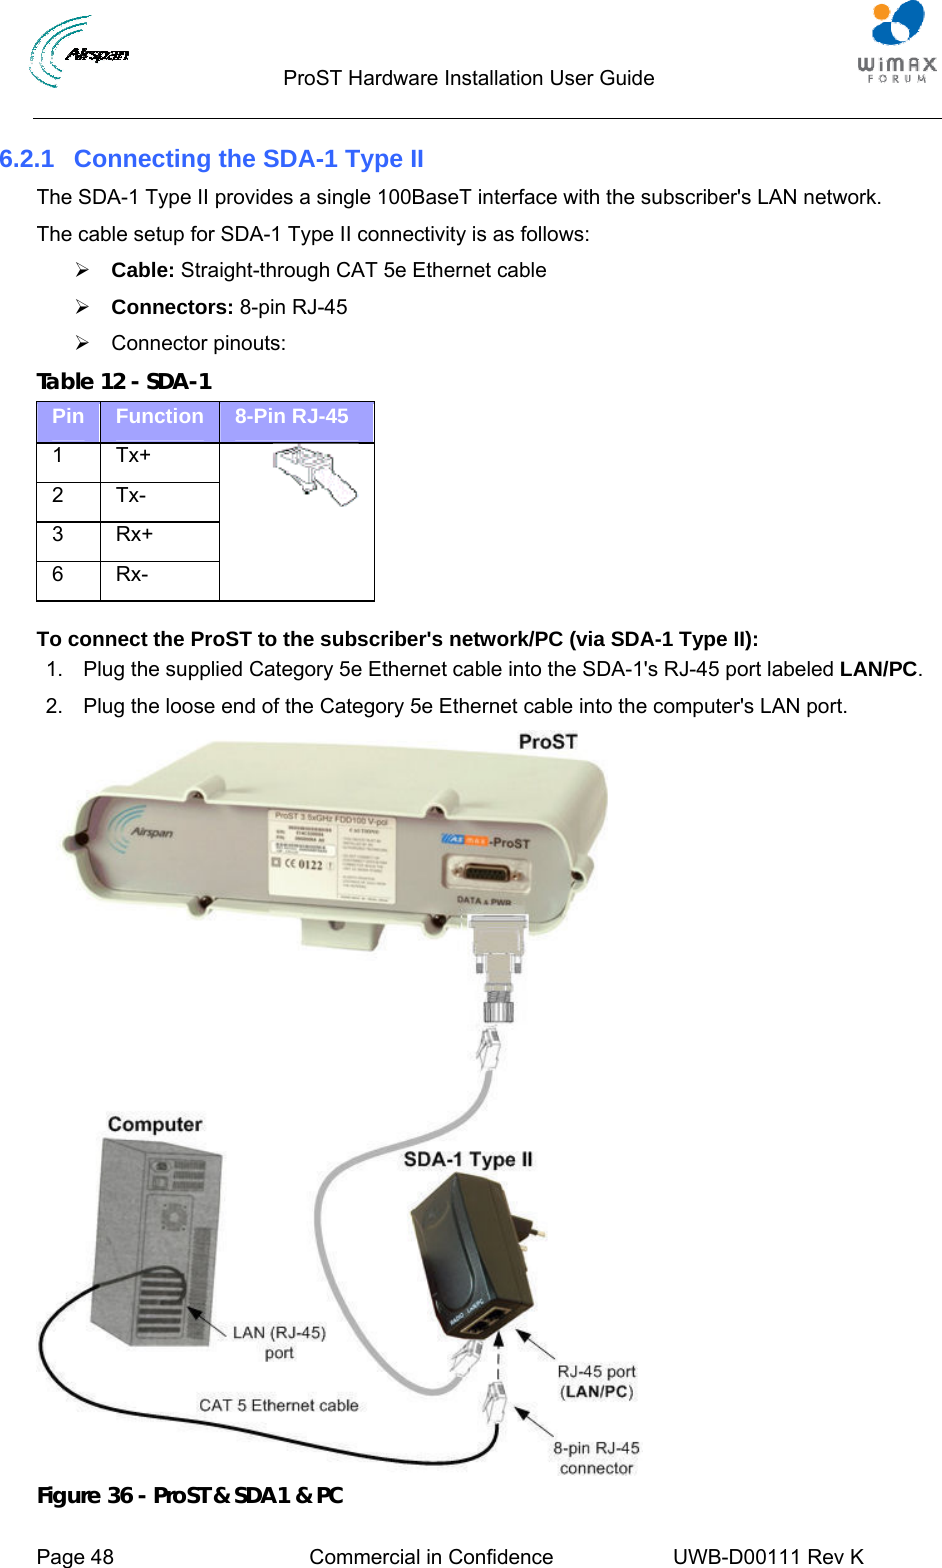                                  ProST Hardware Installation User Guide     Page 48  Commercial in Confidence  UWB-D00111 Rev K   6.2.1  Connecting the SDA-1 Type II The SDA-1 Type II provides a single 100BaseT interface with the subscriber&apos;s LAN network. The cable setup for SDA-1 Type II connectivity is as follows: ¾ Cable: Straight-through CAT 5e Ethernet cable ¾ Connectors: 8-pin RJ-45 ¾ Connector pinouts: Table 12 - SDA-1 Pin  Function  8-Pin RJ-45 1 Tx+ 2 Tx- 3 Rx+ 6 Rx-    To connect the ProST to the subscriber&apos;s network/PC (via SDA-1 Type II): 1.  Plug the supplied Category 5e Ethernet cable into the SDA-1&apos;s RJ-45 port labeled LAN/PC. 2.  Plug the loose end of the Category 5e Ethernet cable into the computer&apos;s LAN port.  Figure 36 - ProST &amp; SDA1 &amp; PC 